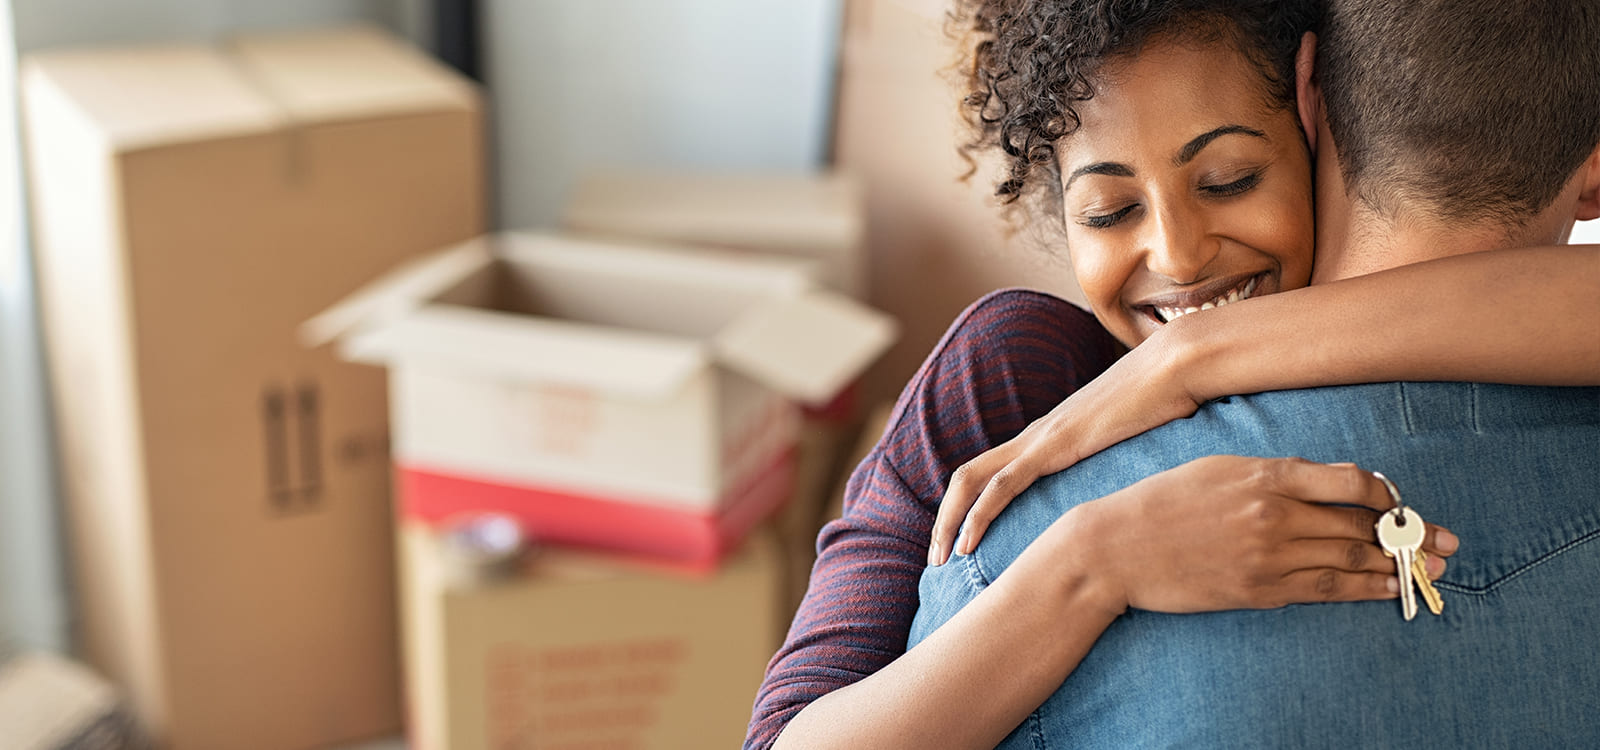 couple hugging with keys in hand and moving boxes in background